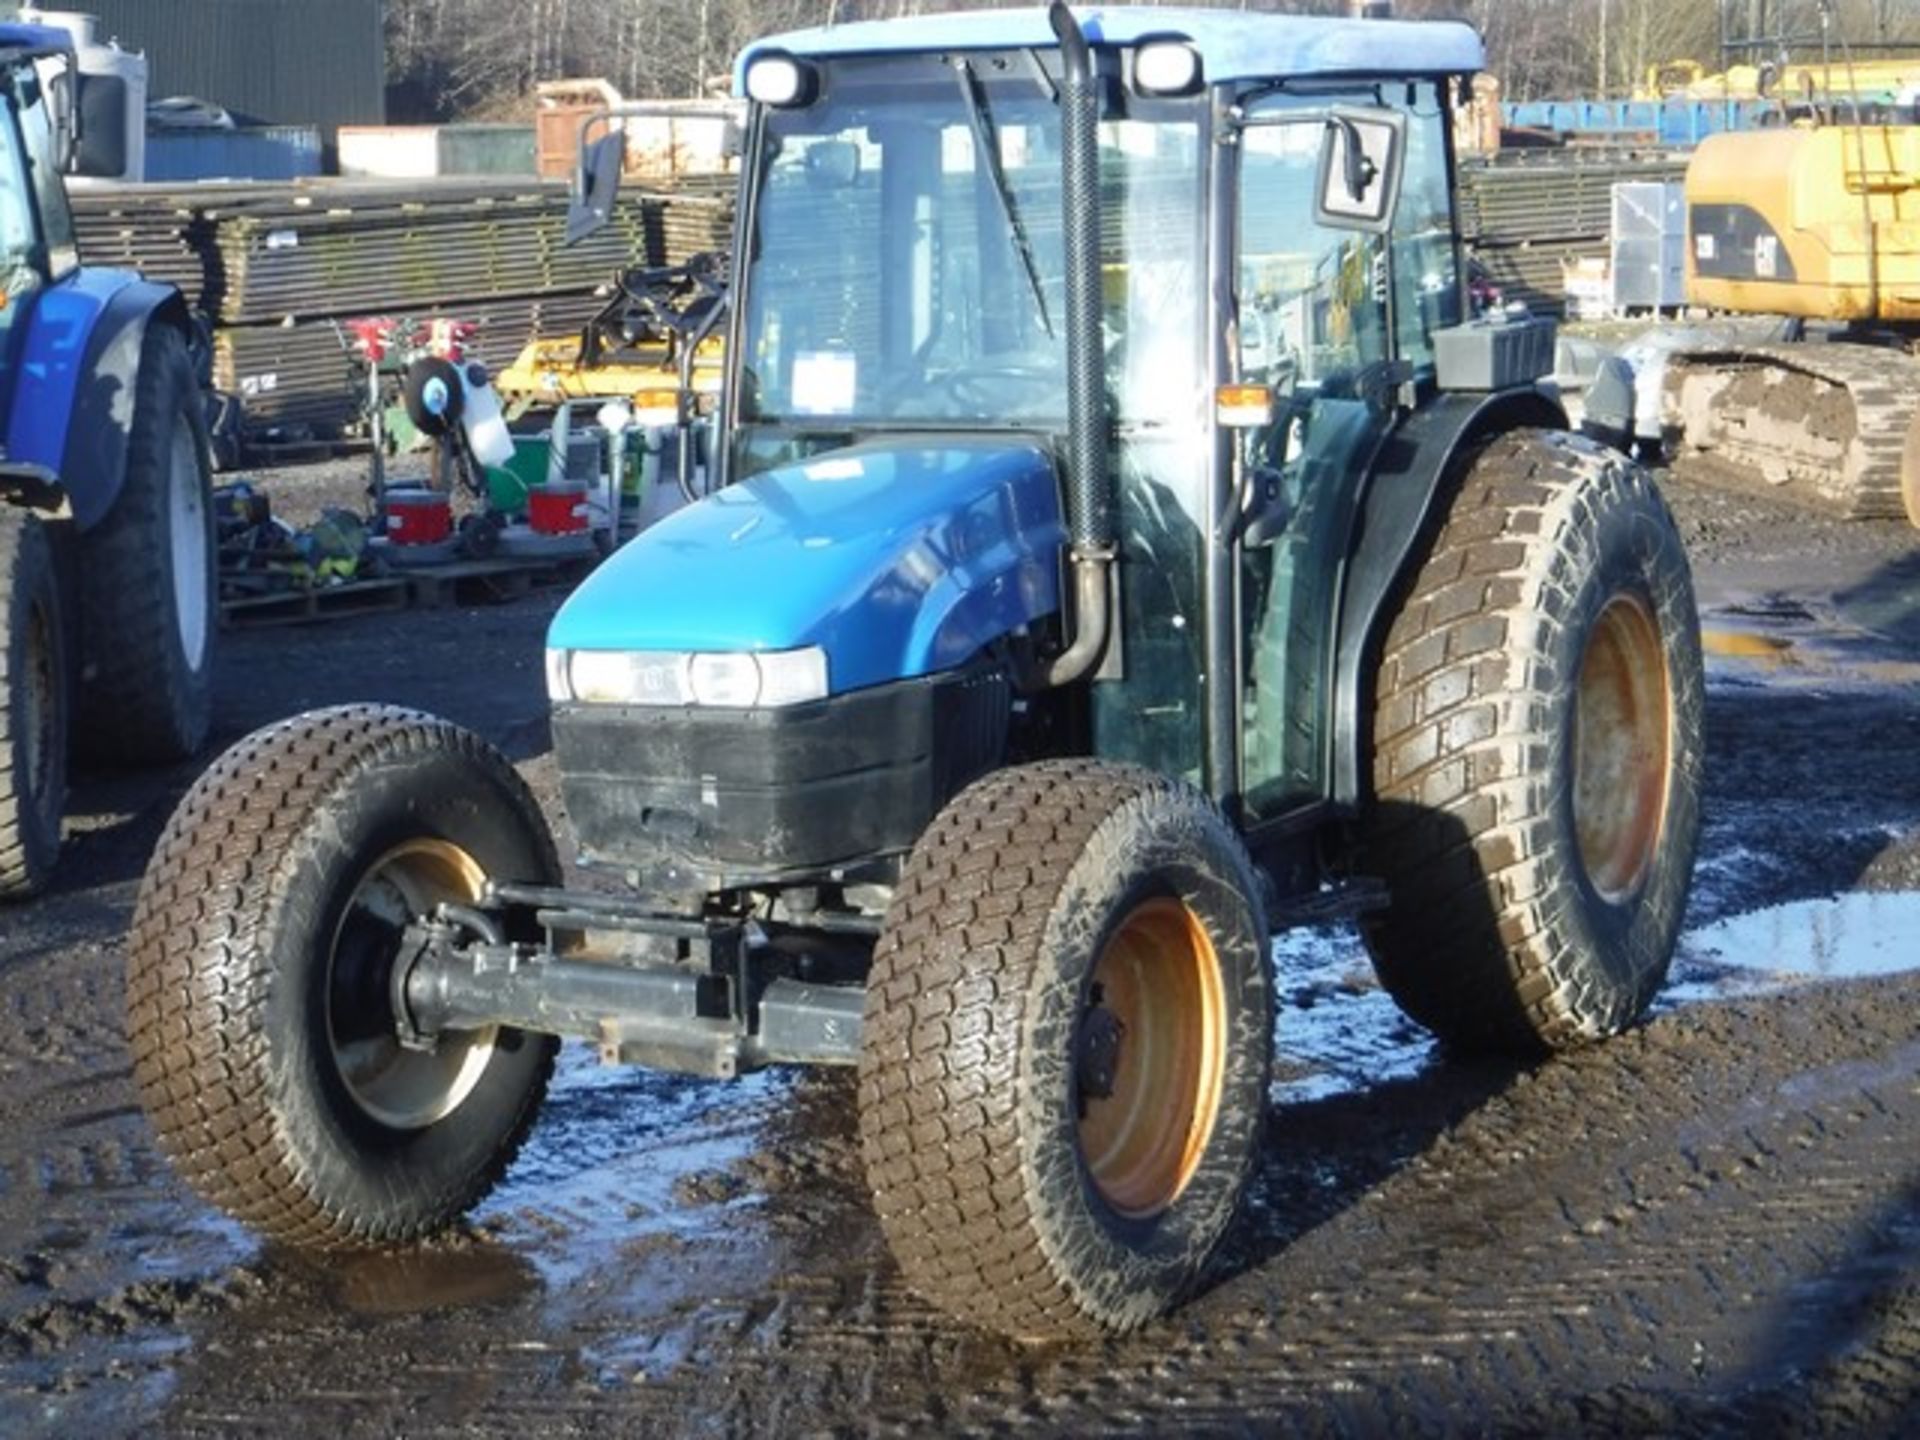 NEW HOLLAND TRACTOR C/W REAR PTO 1727HRS (CORRECT) REG - AW02AUT YEAR 2002 - Image 2 of 9